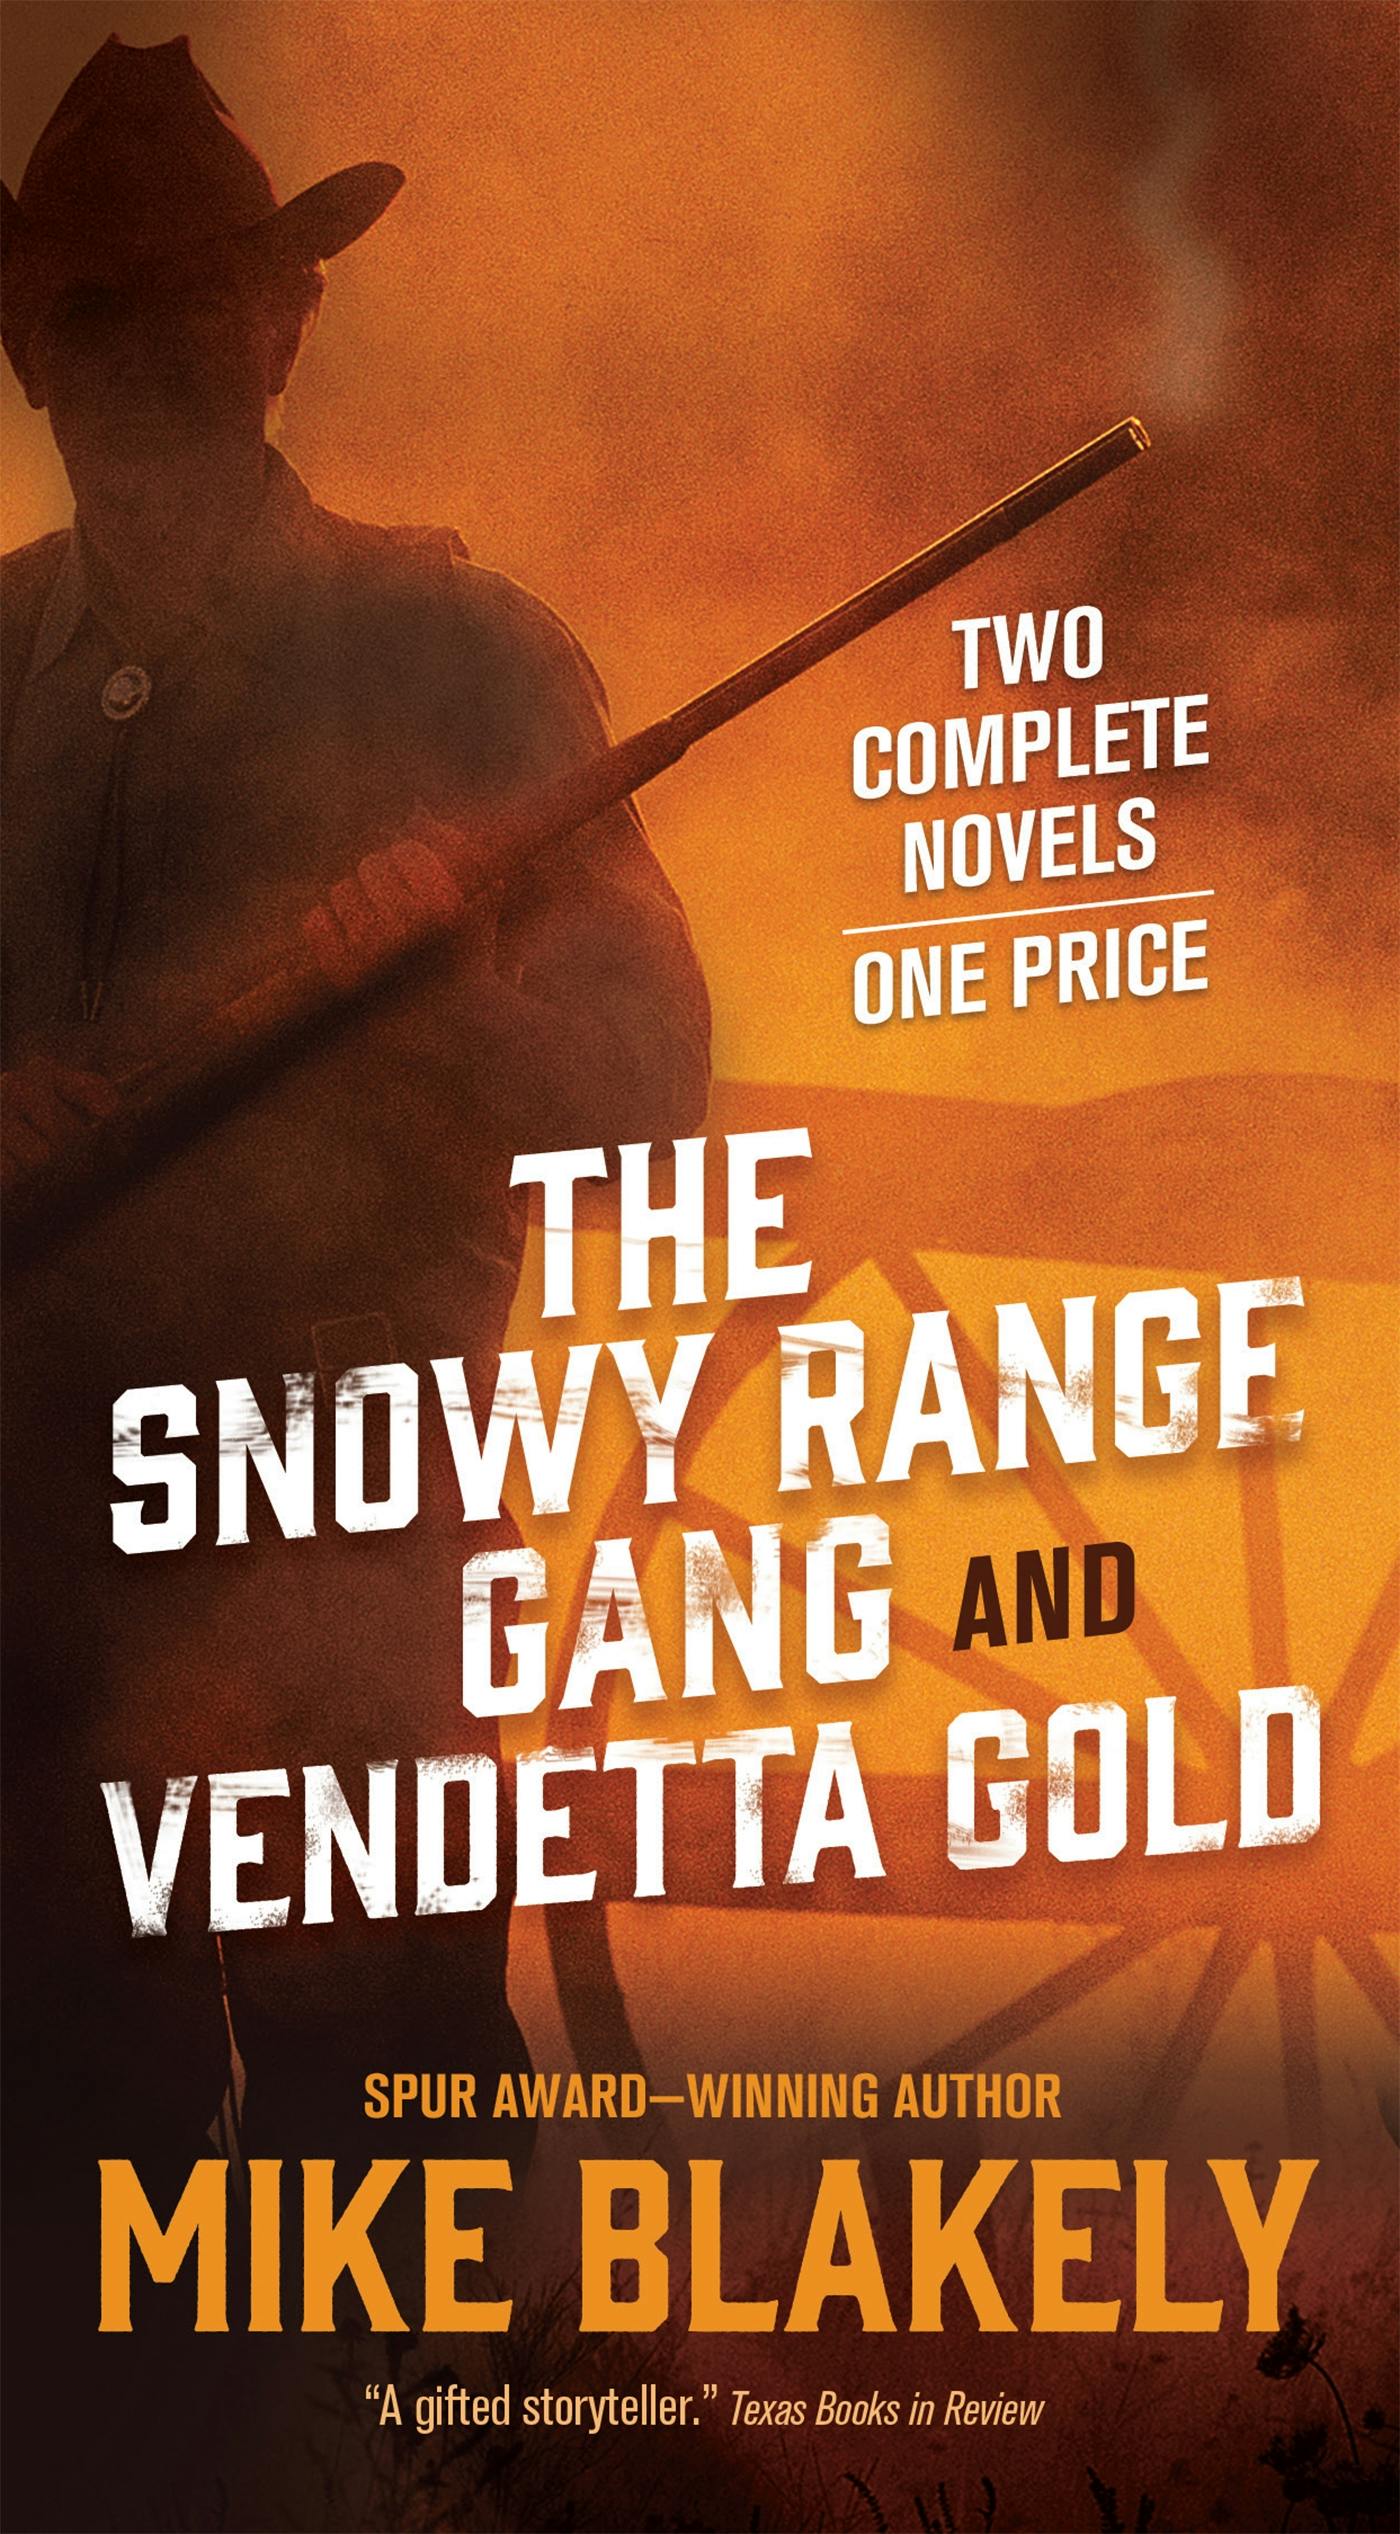 Cover for the book titled as: The Snowy Range Gang and Vendetta Gold